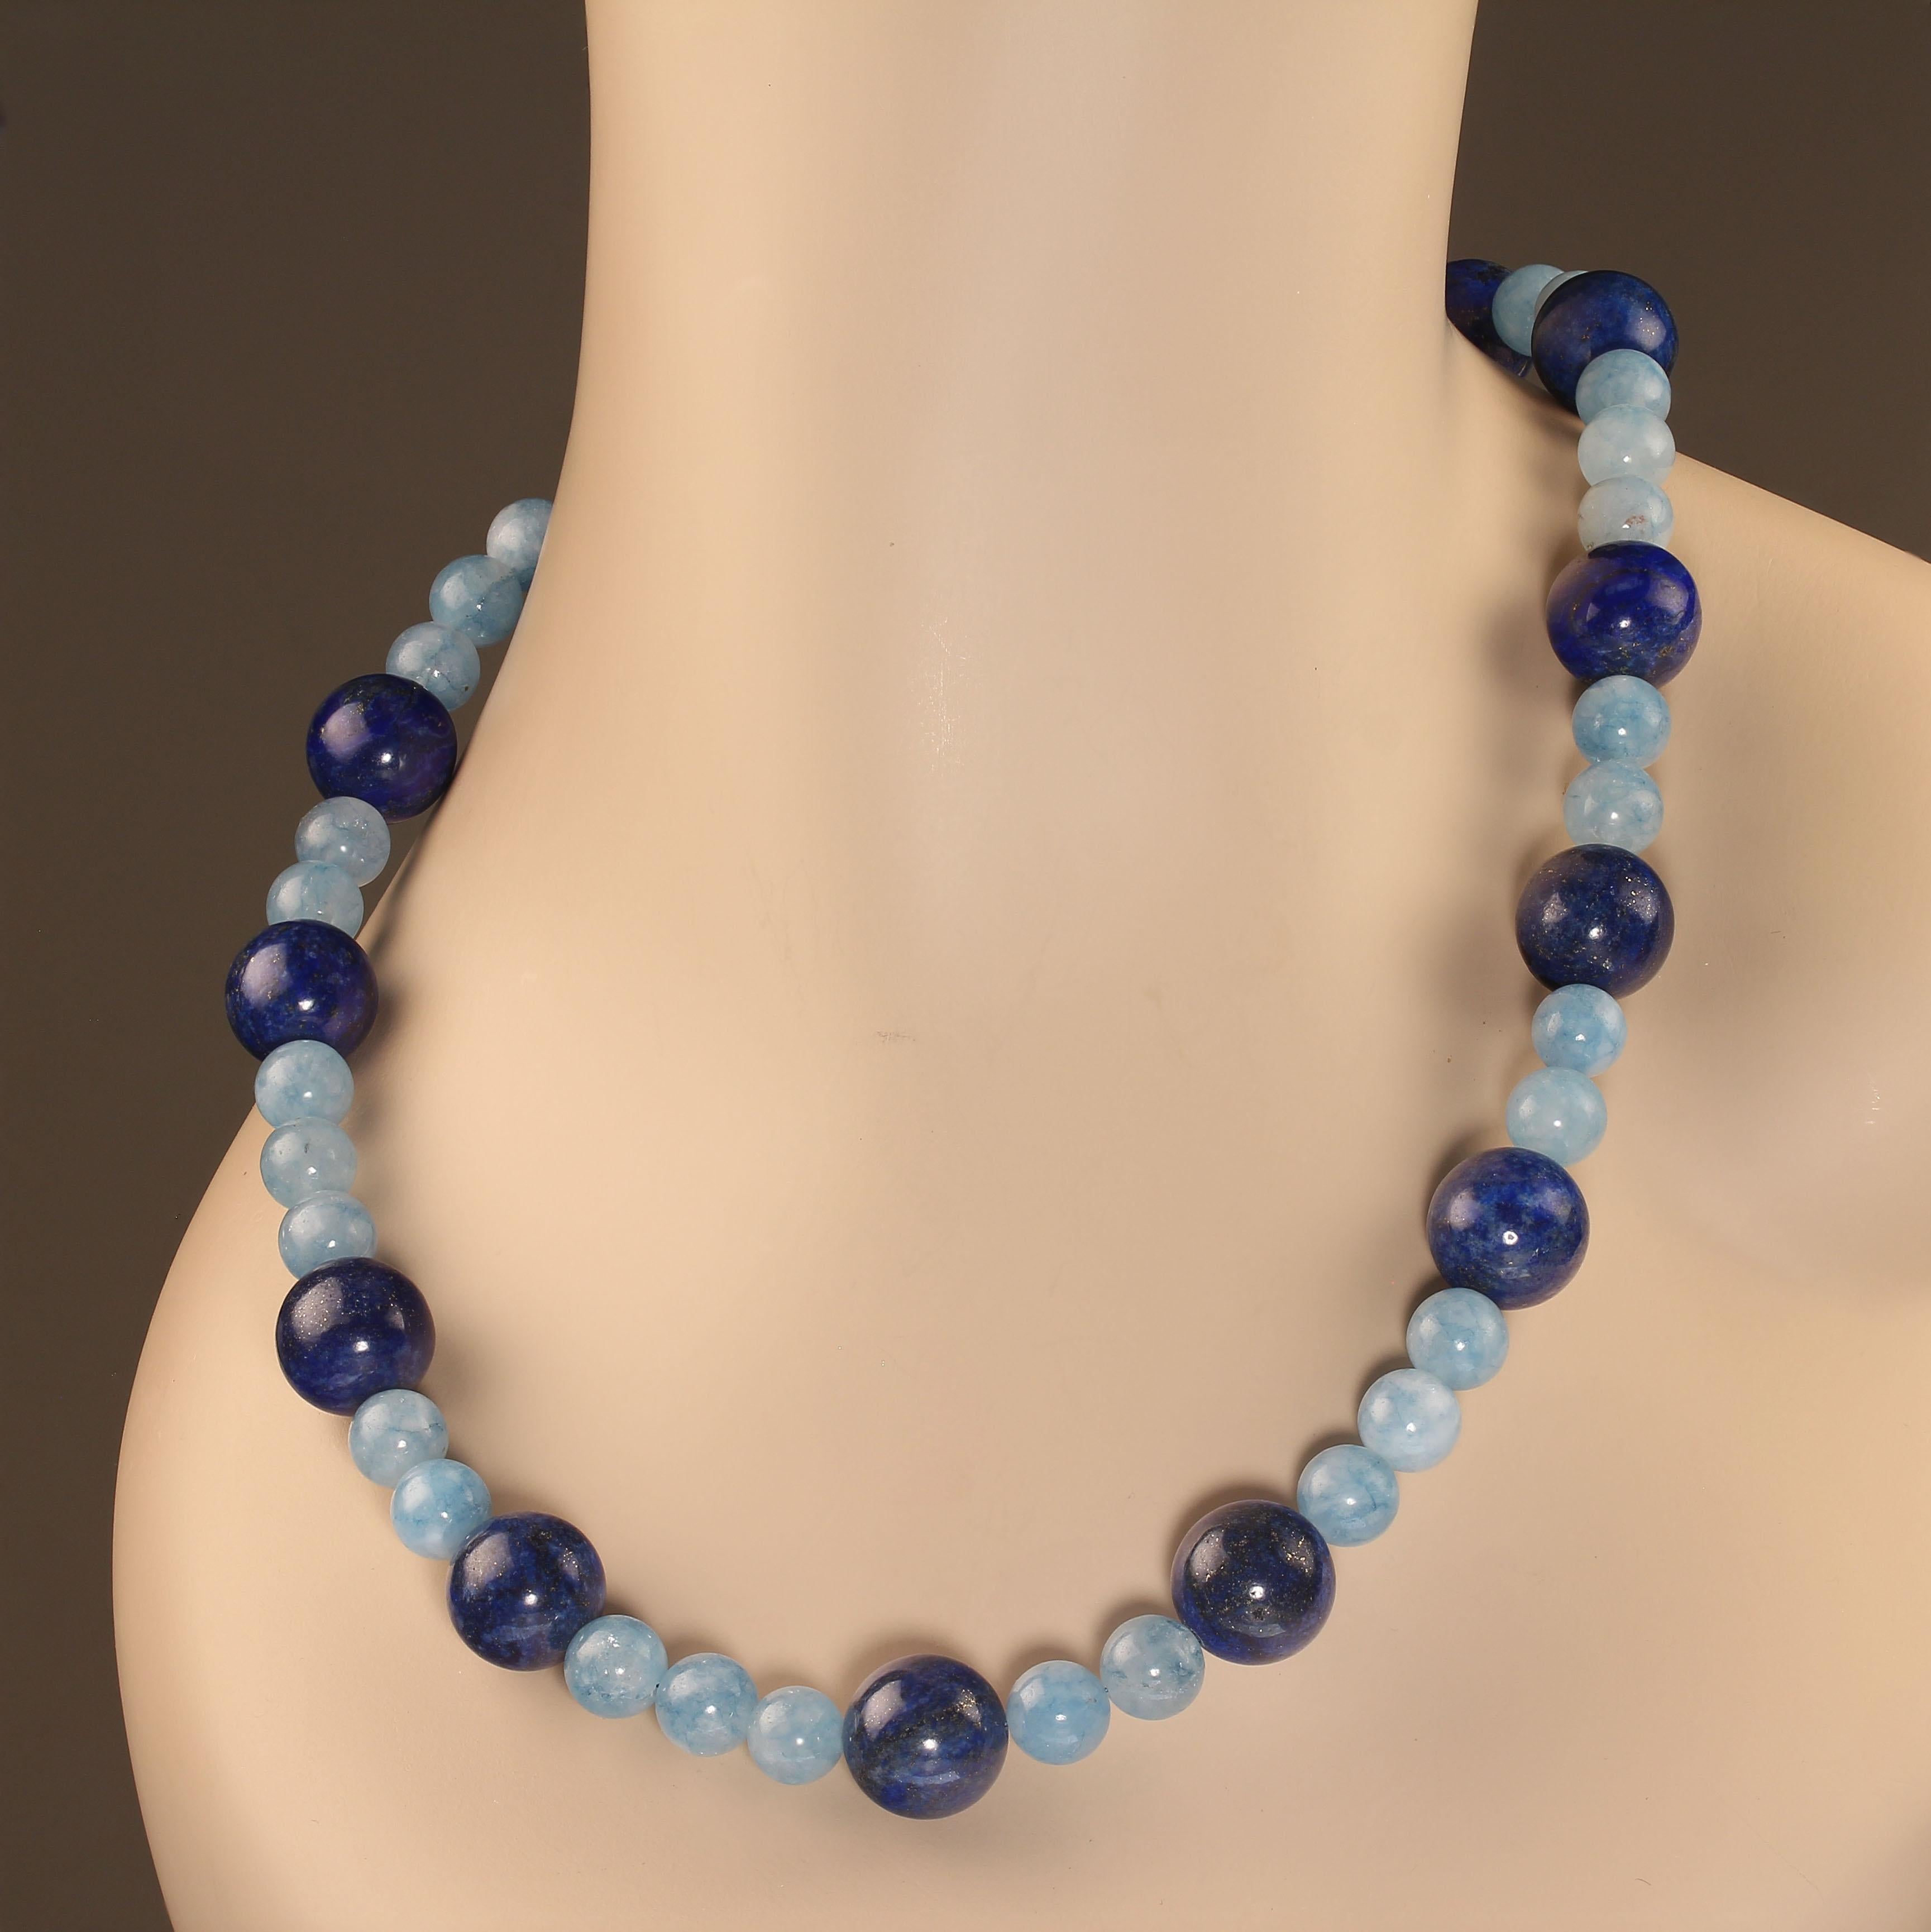 Artisan AJD Magnificent Lapis Lazuli and Aquamarine 27 Inch Statement Necklace   Gift!! For Sale